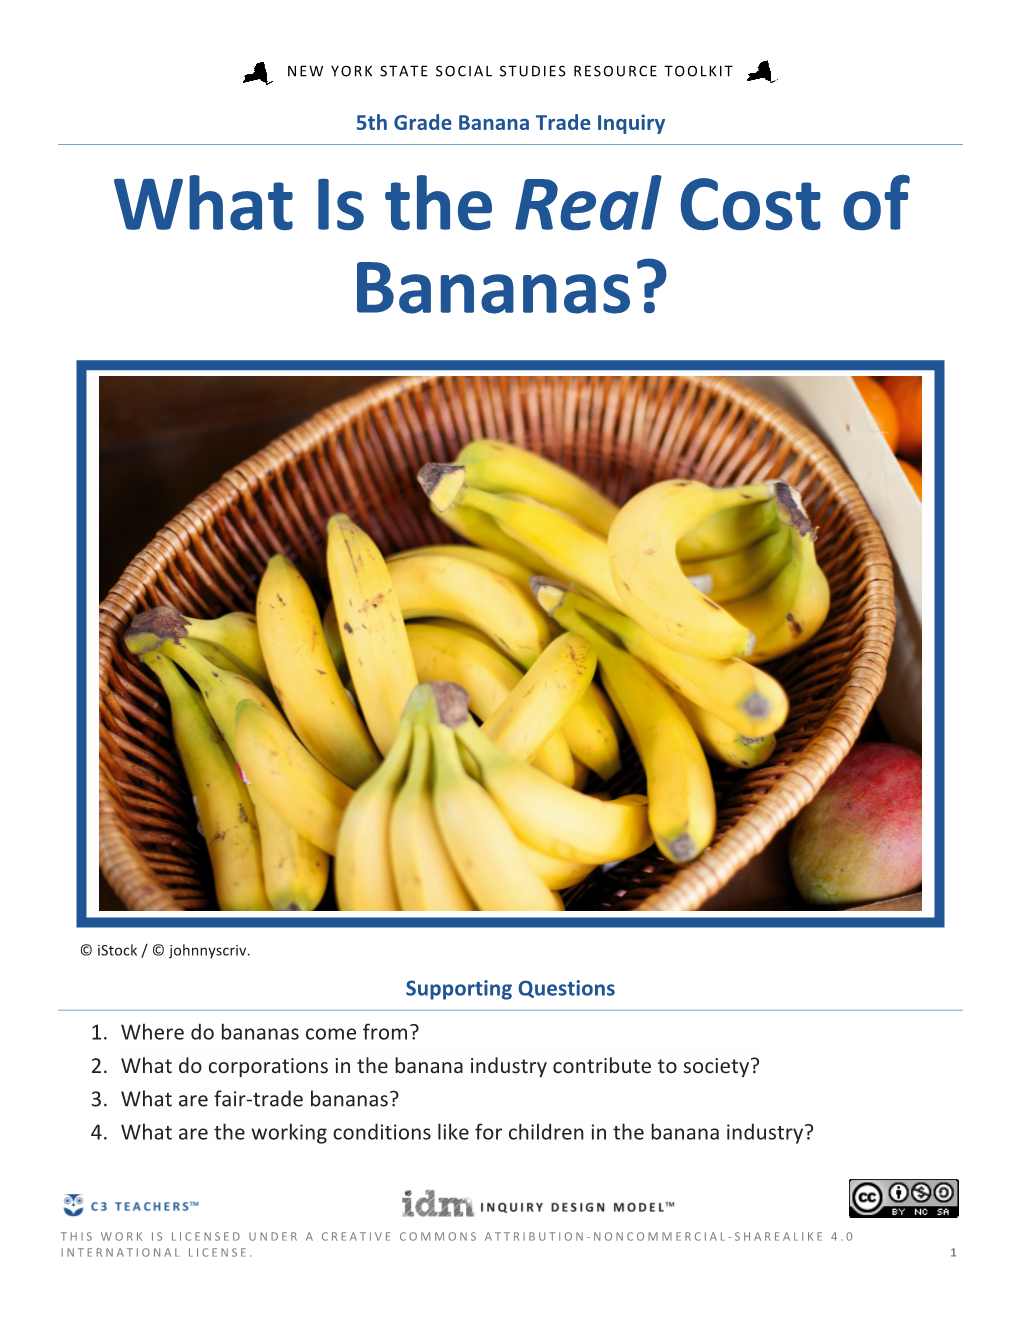 What Is the Real Cost of Bananas?